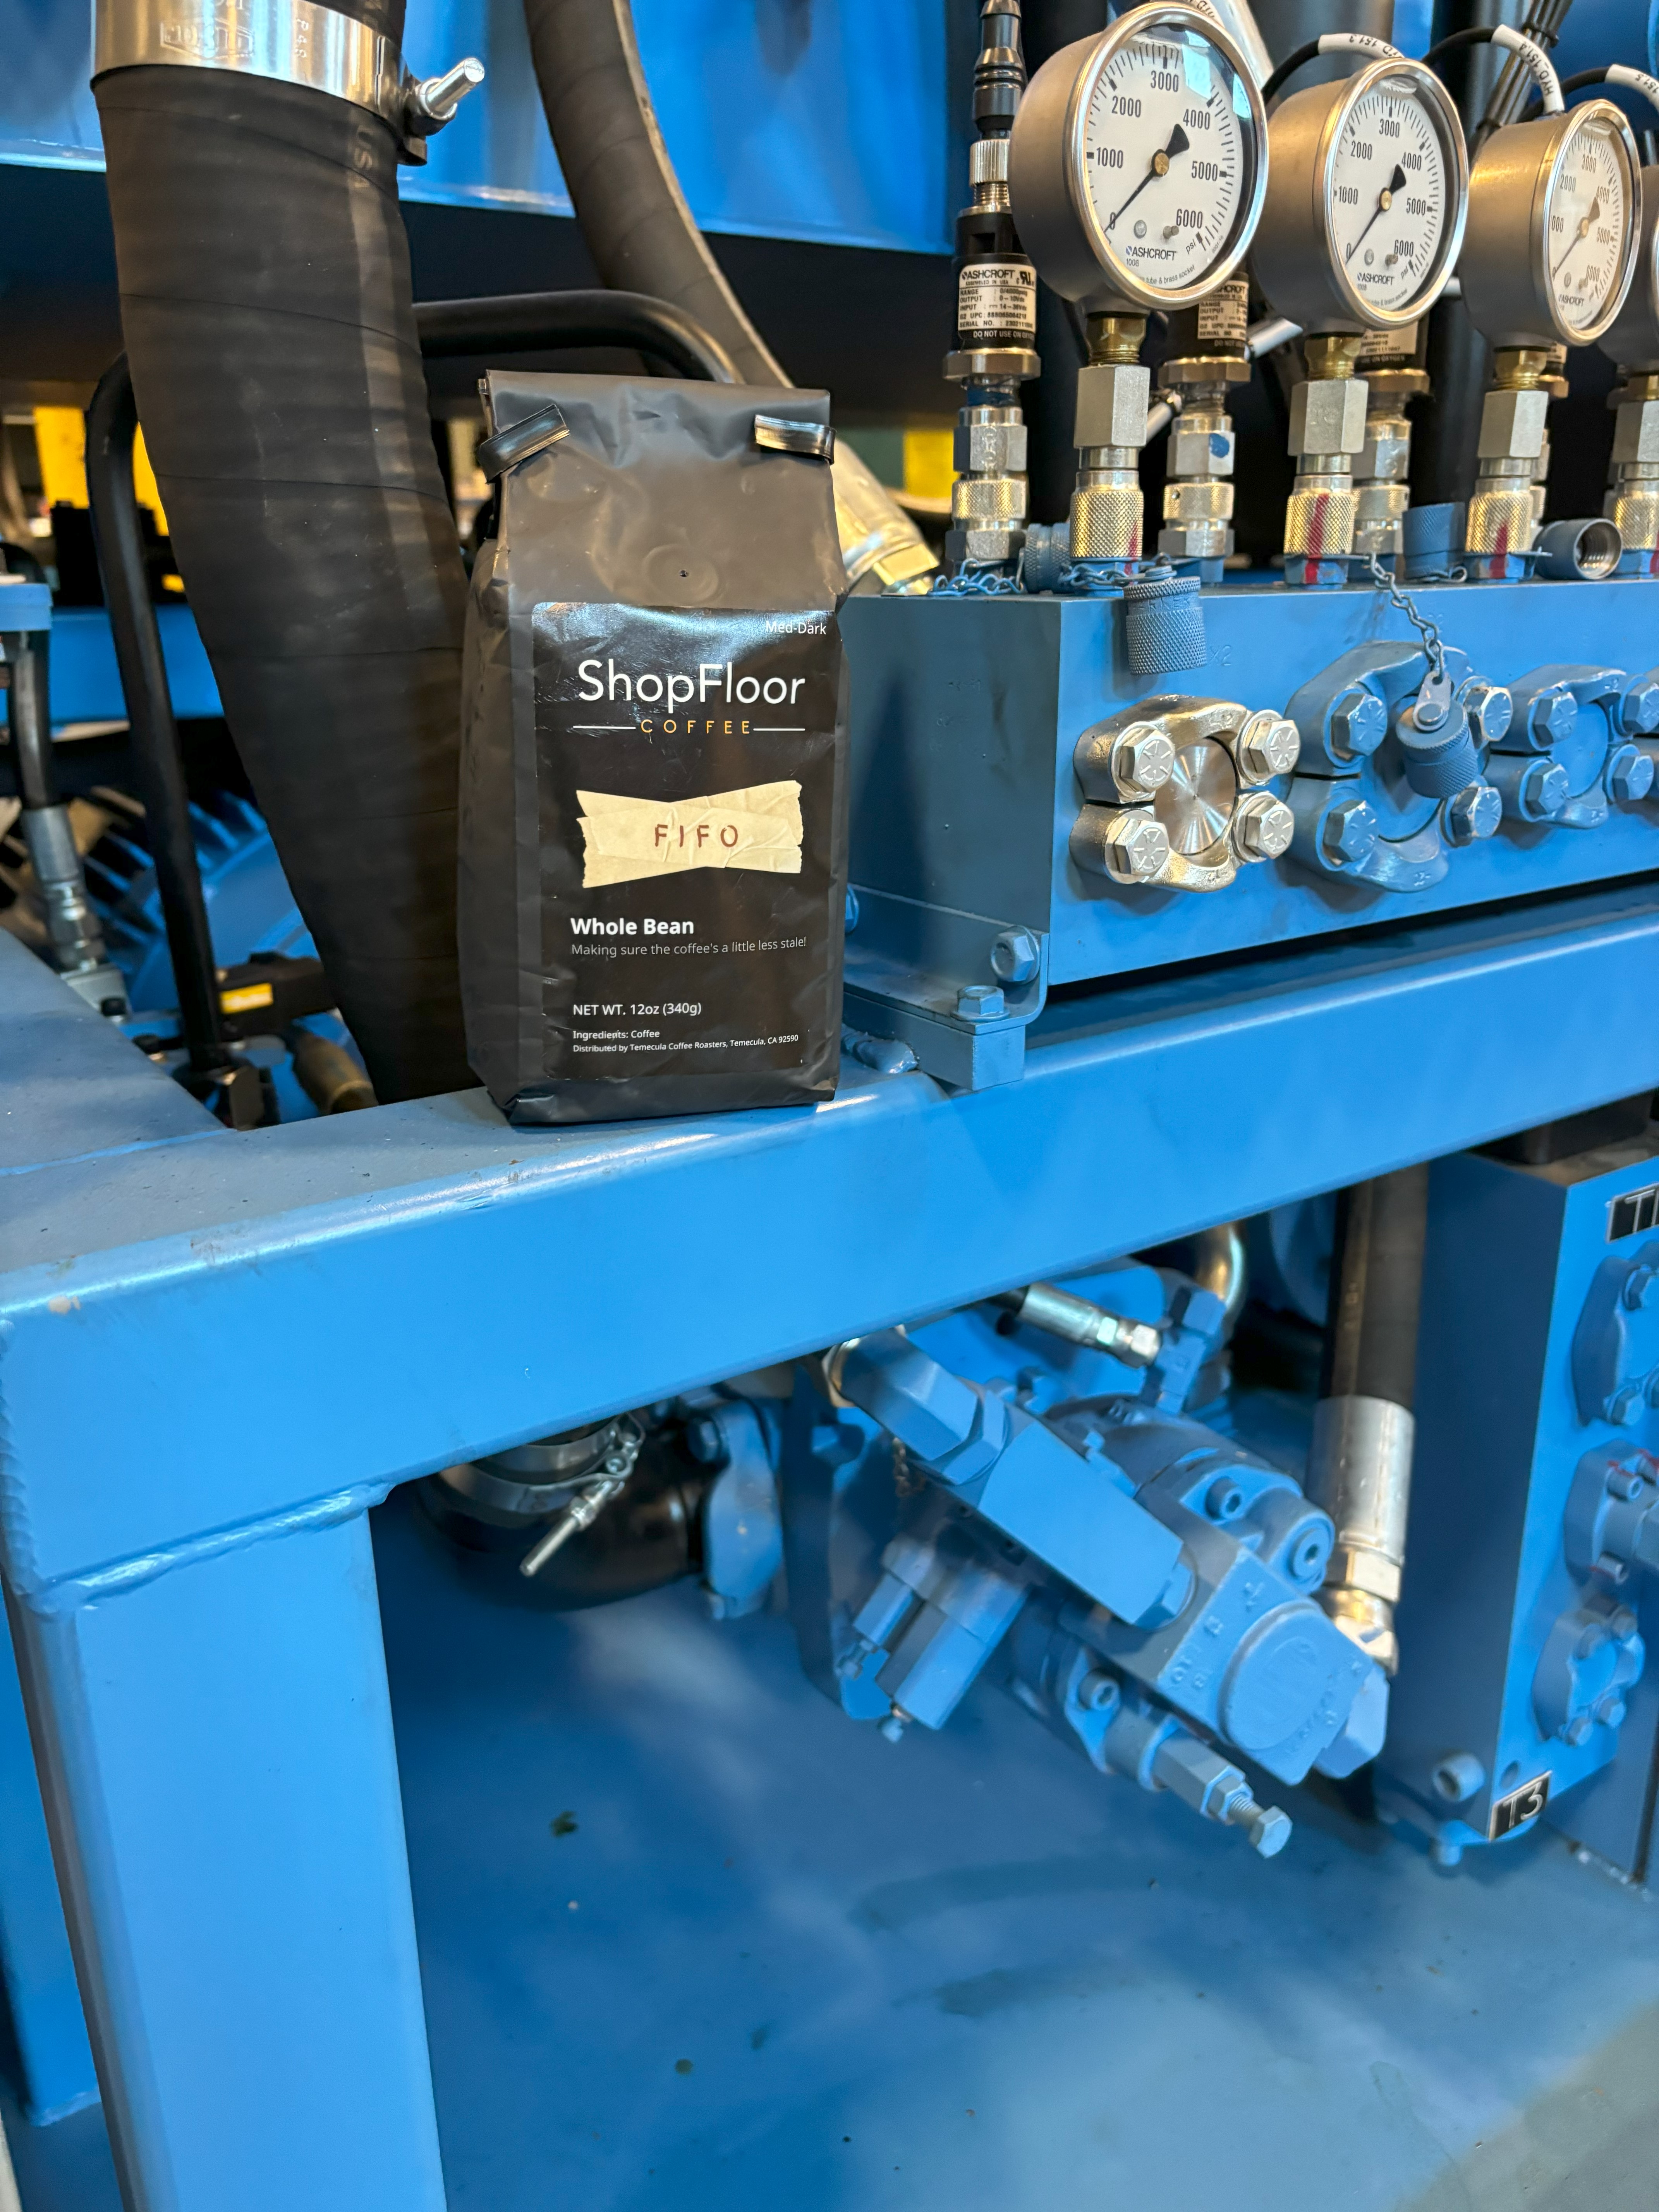 The ShopFloor Coffee model is to sell good coffee to manufacturers and donate a cut of the proceeds to workforce-development programs for the industry.  